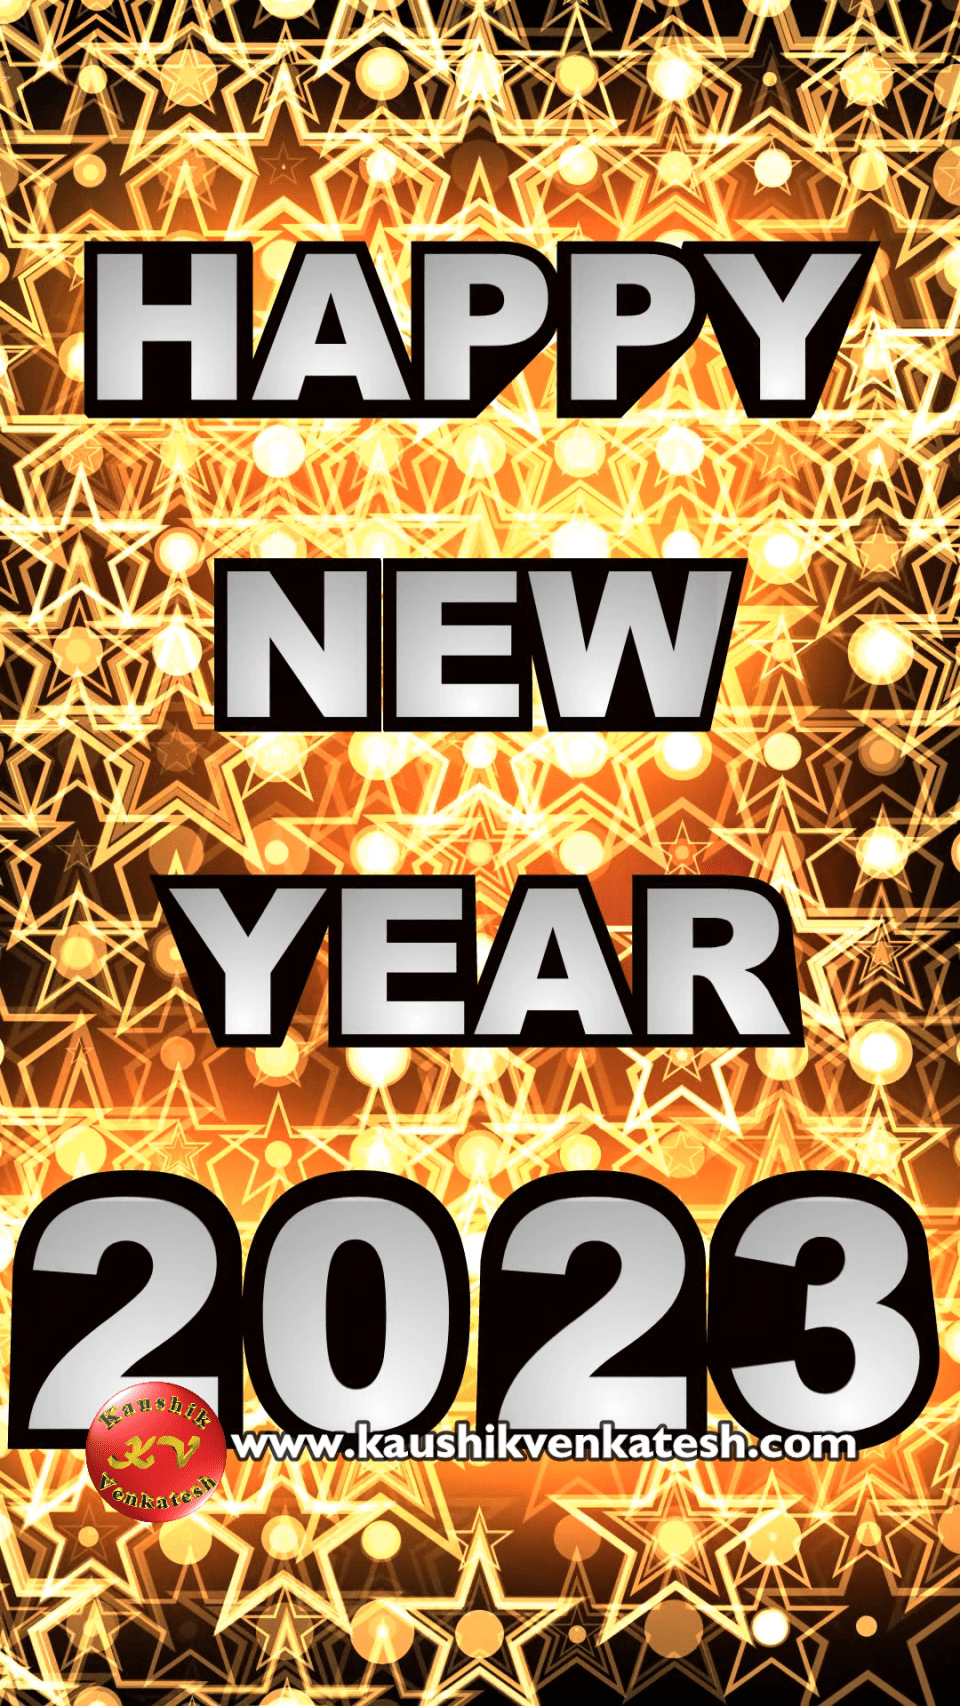 HAPPY NEW YEAR INSTAGRAM STORY Template  PosterMyWall